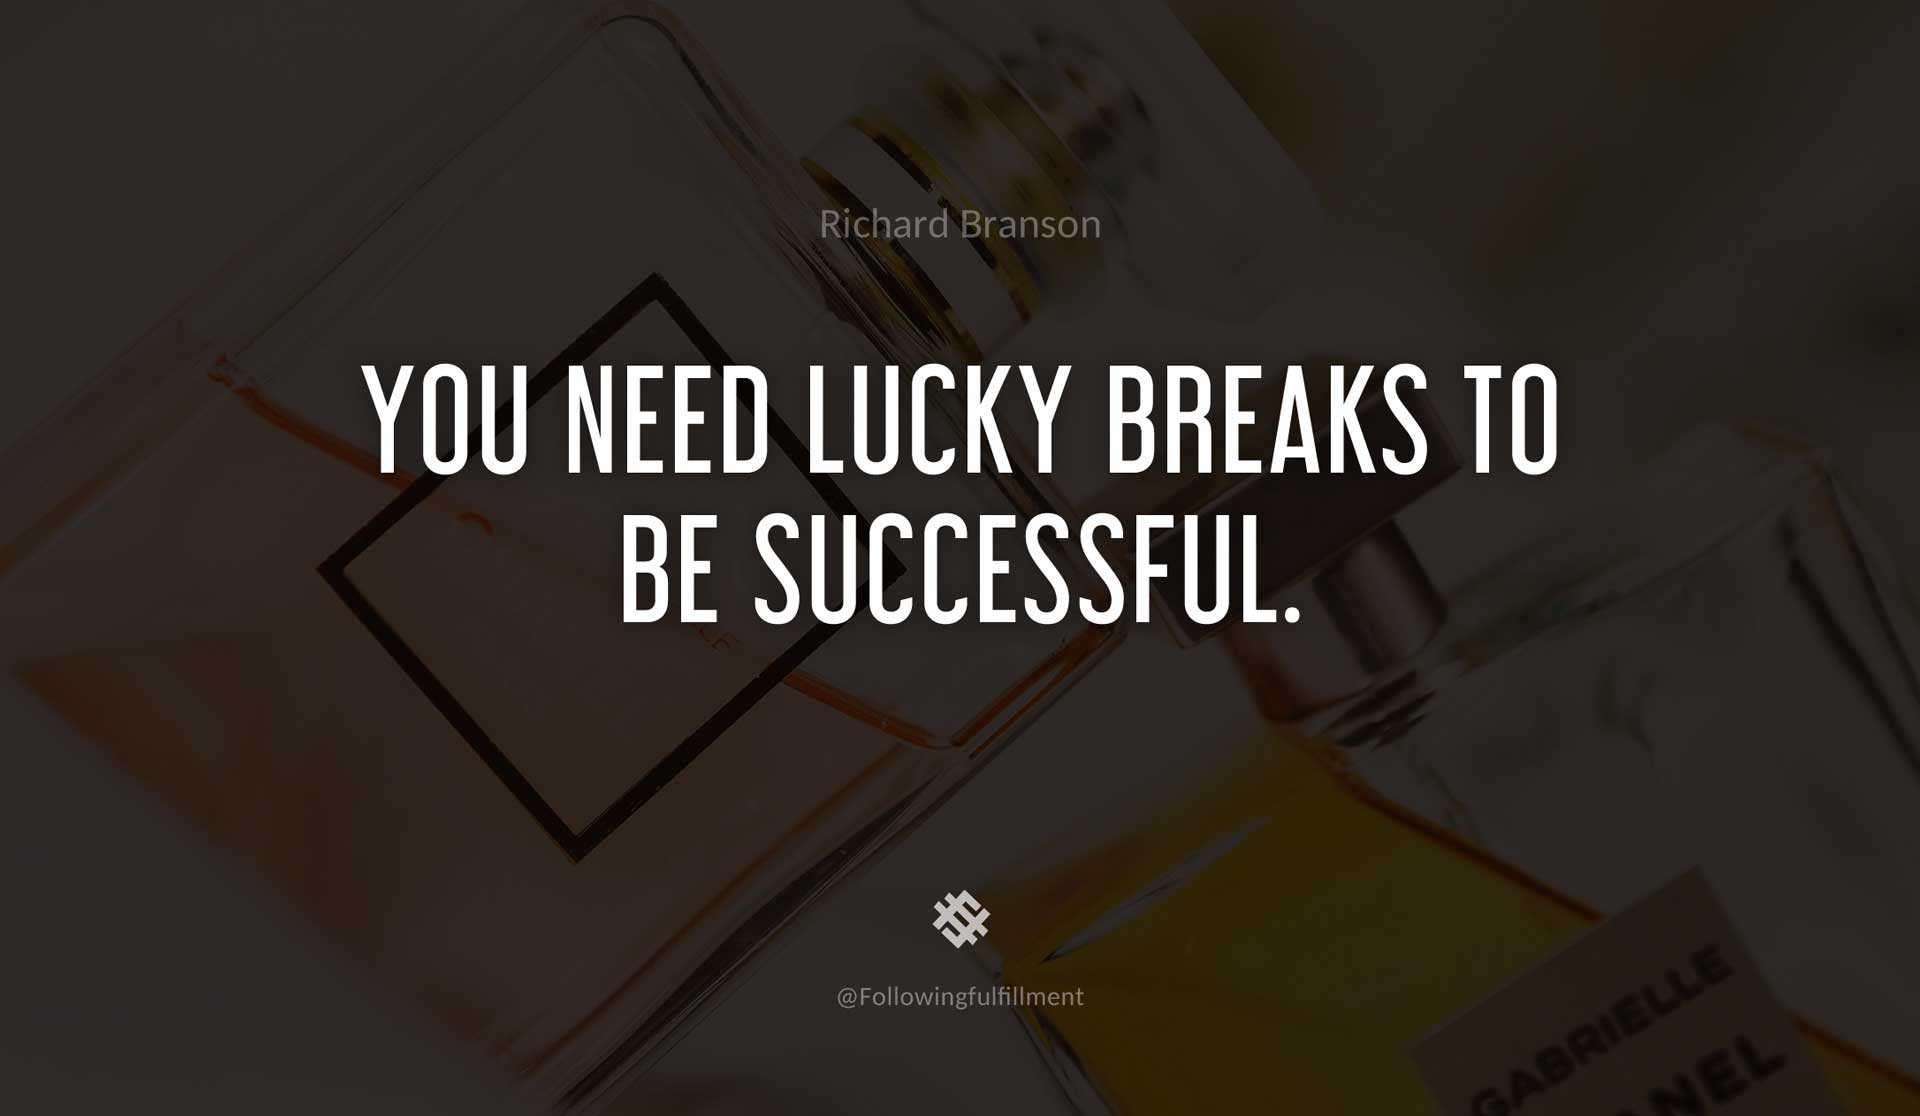 You-need-lucky-breaks-to-be-successful.-RICHARD-BRANSON-Quote.jpg